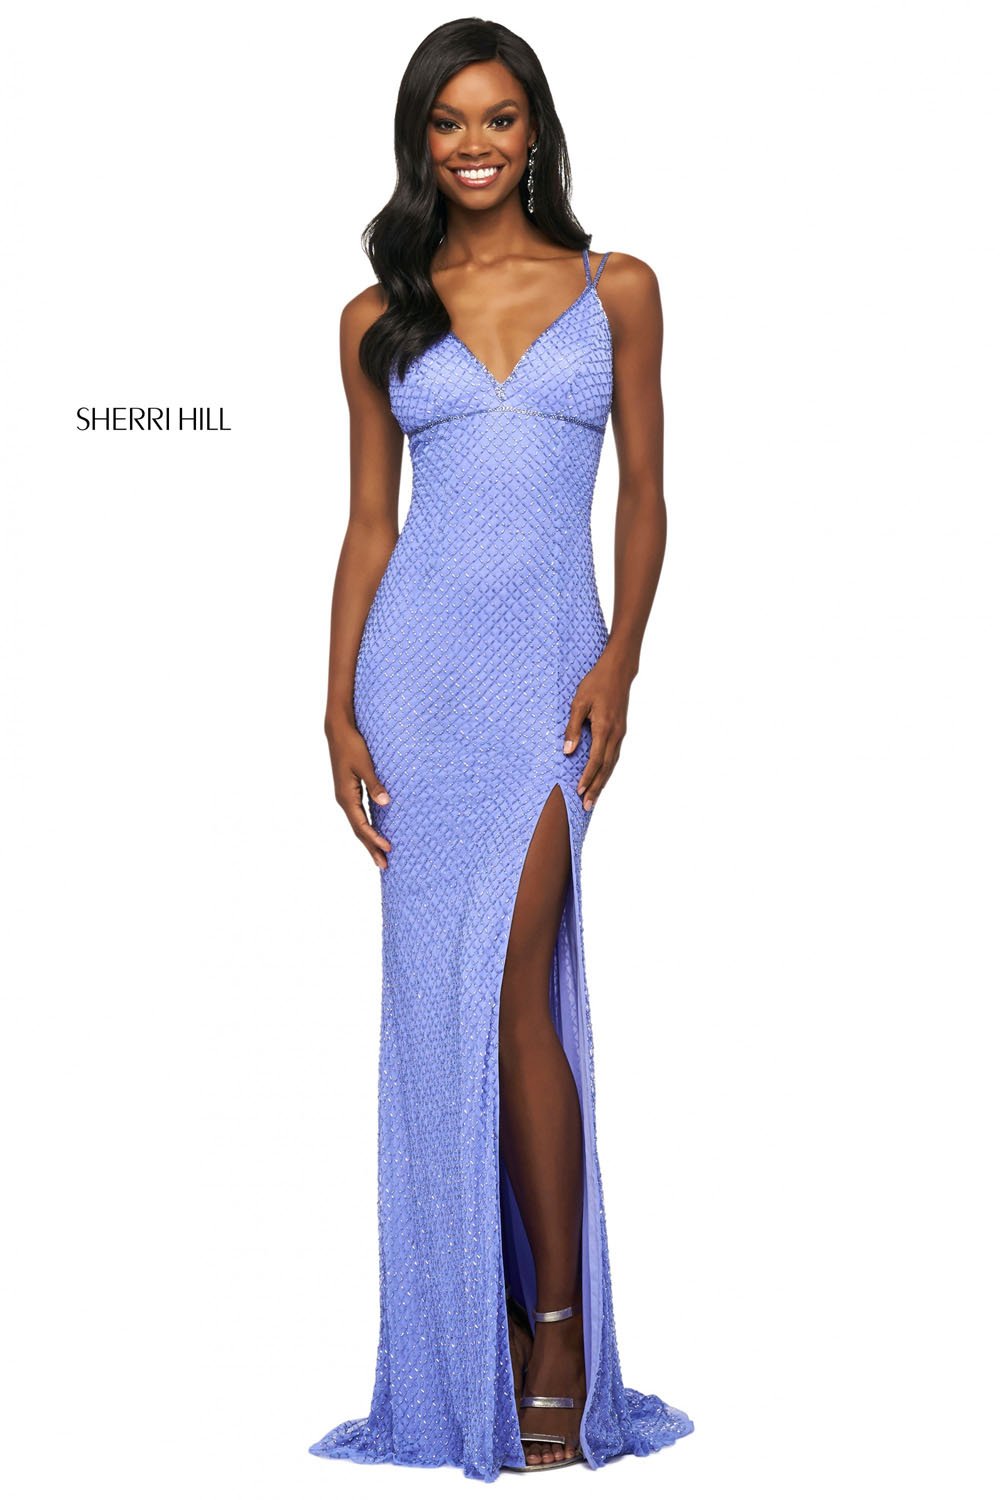 Sherri Hill 53878 dress images in these colors: Black, Light Pink, Teal, Periwinkle, Burgundy.